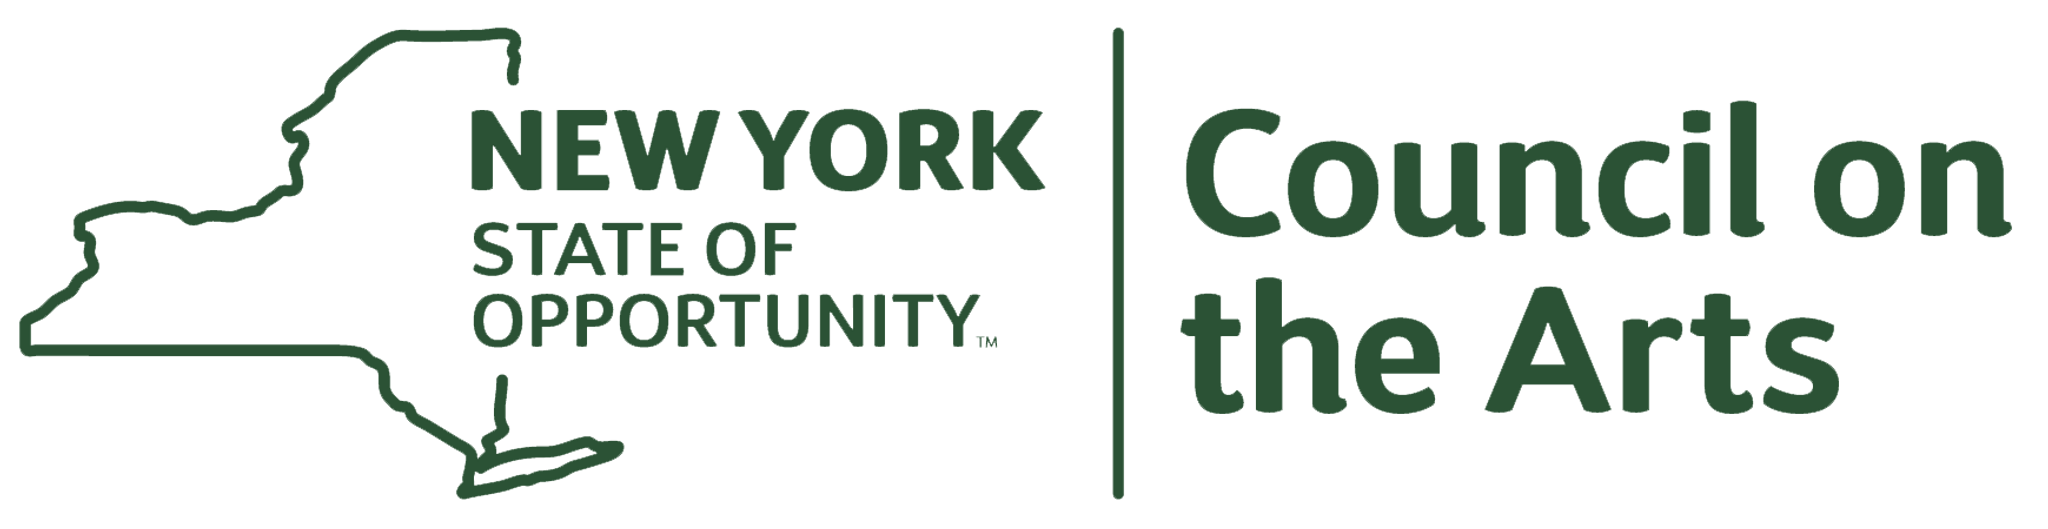 The New York State Council on the Arts logo including the outline of the state and the name of the organization in green